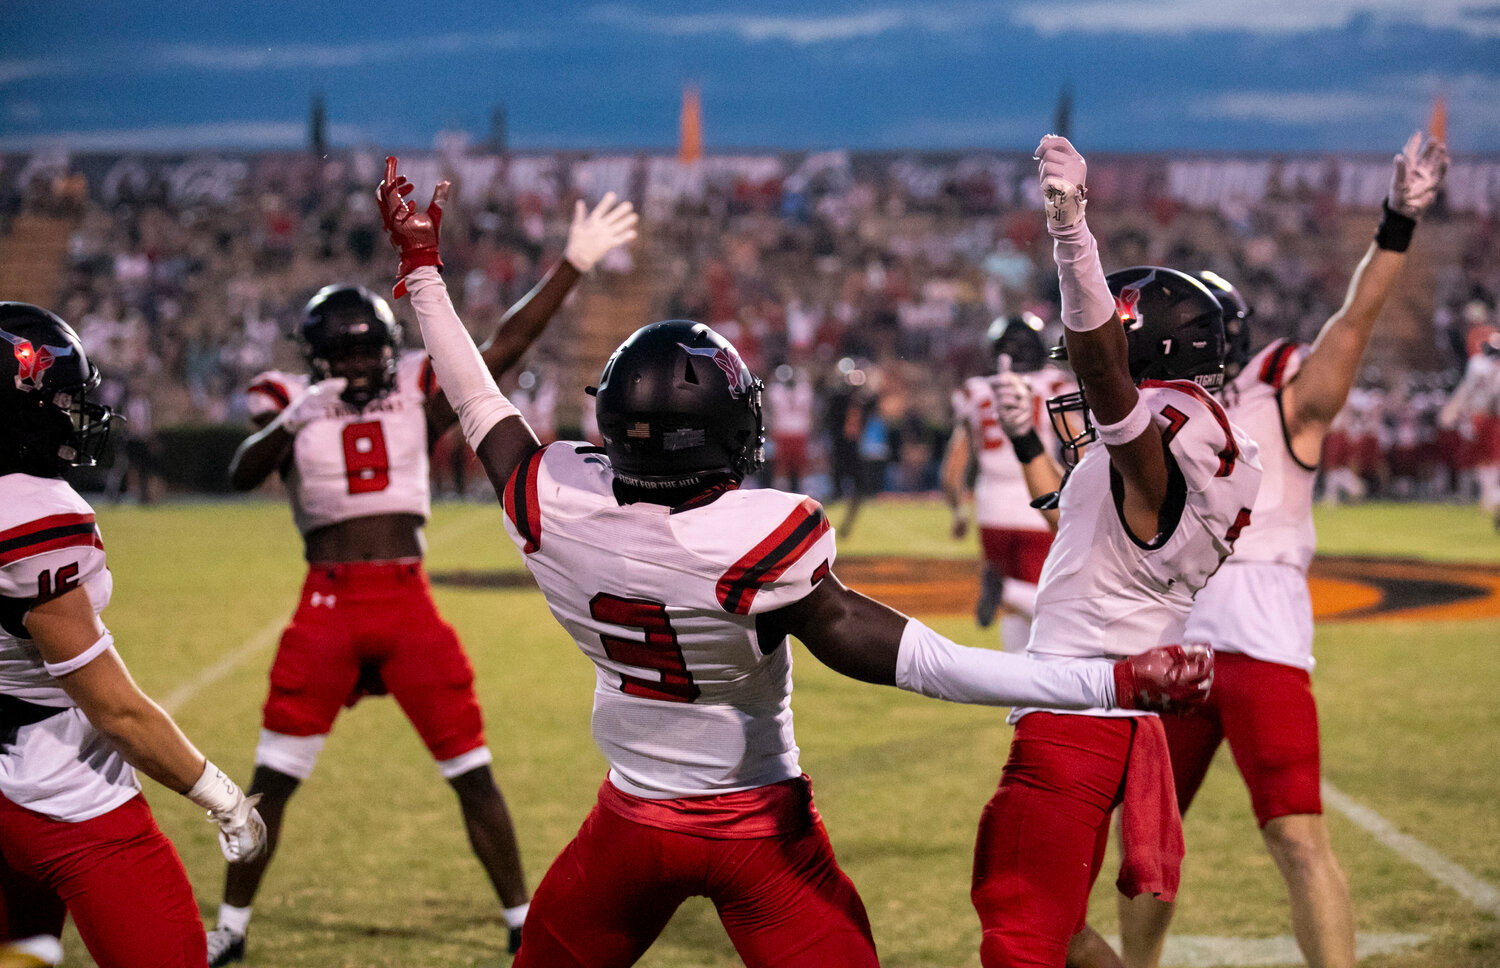 The Spanish Fort defense, including Landon York (16), Javonte Wilson (8) and Isaiah Spencer (7), celebrates Markell Kyer’s (3) first-half interception during the Toros’ region tilt against the Baldwin County Tigers at Lyle Underwood Stadium in Bay Minette on Friday, Sept. 8. The Spanish Fort defense staved off a second-half comeback to help earn a 14-13 win.